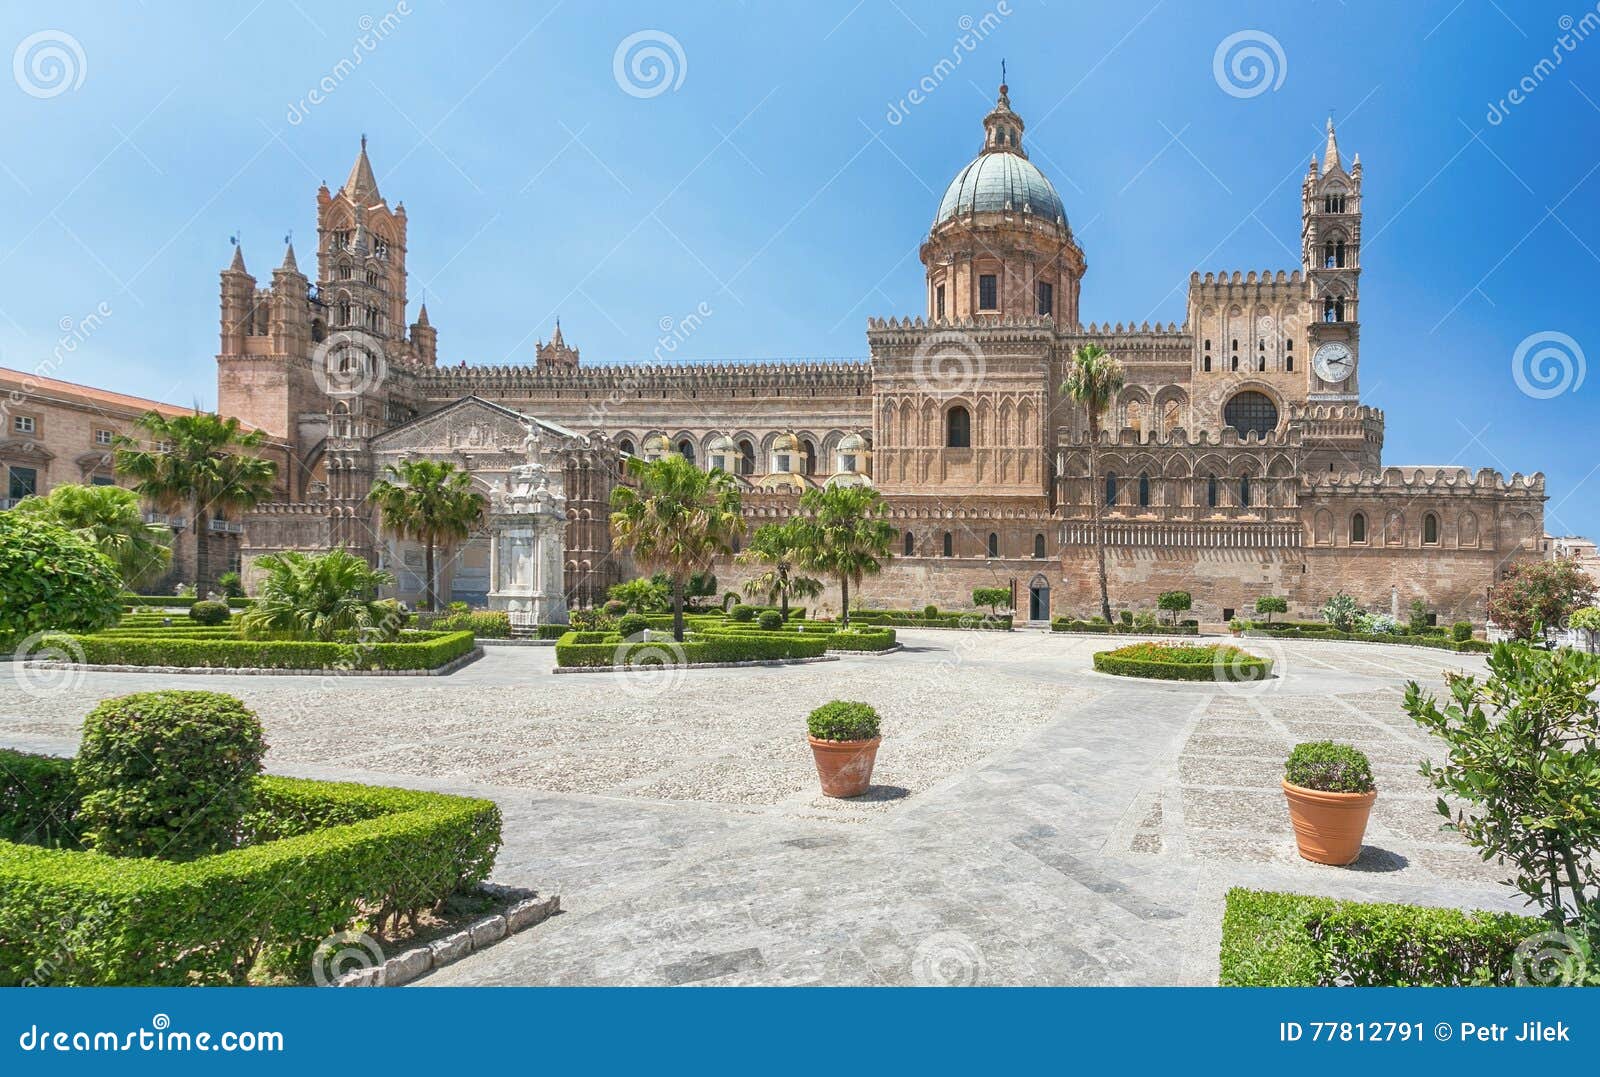 palermo cathedral metropolitan cathedral of the assumption of virgin mary in palermo, sicily, italy. architectural complex built